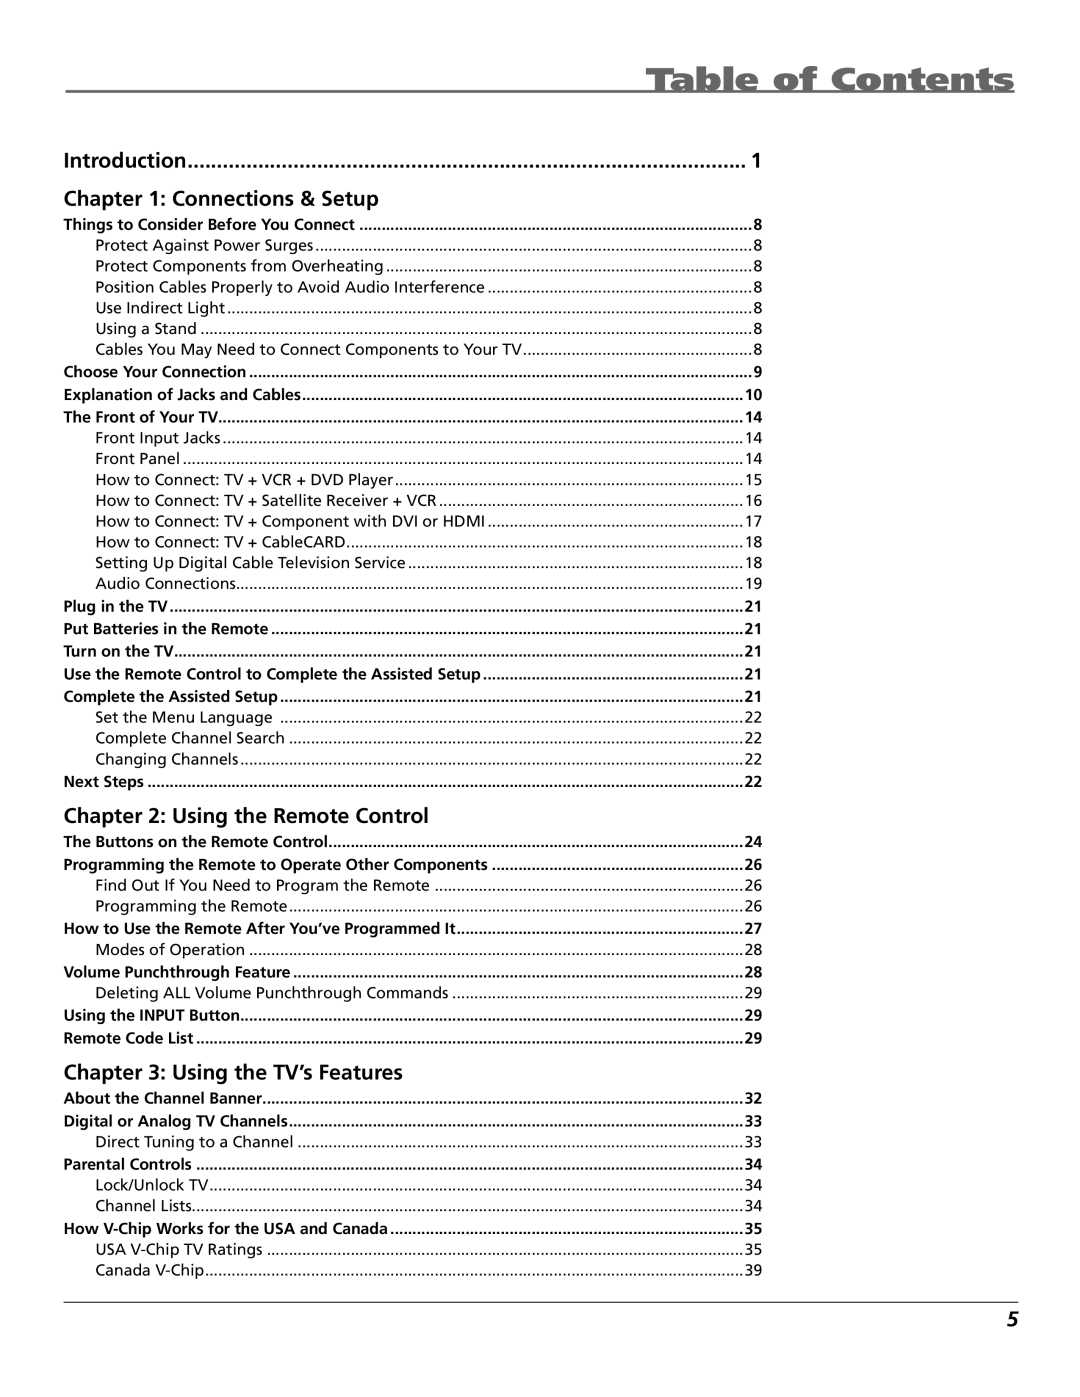 RCA HDTV manual Table of Contents 